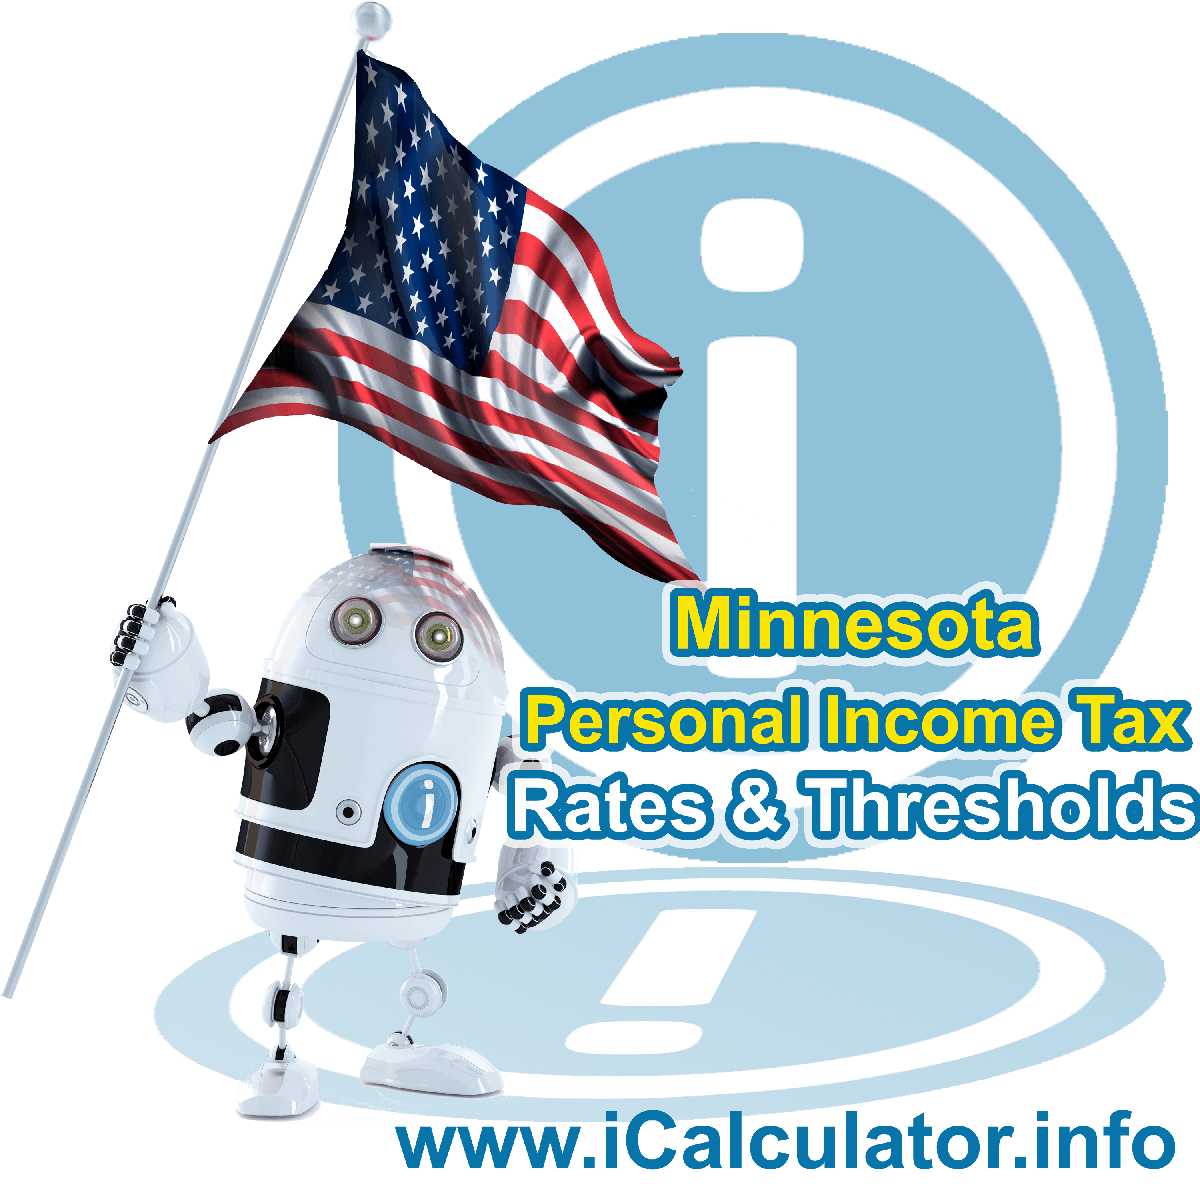 Minnesota State Tax Tables 2015. This image displays details of the Minnesota State Tax Tables for the 2015 tax return year which is provided in support of the 2015 US Tax Calculator